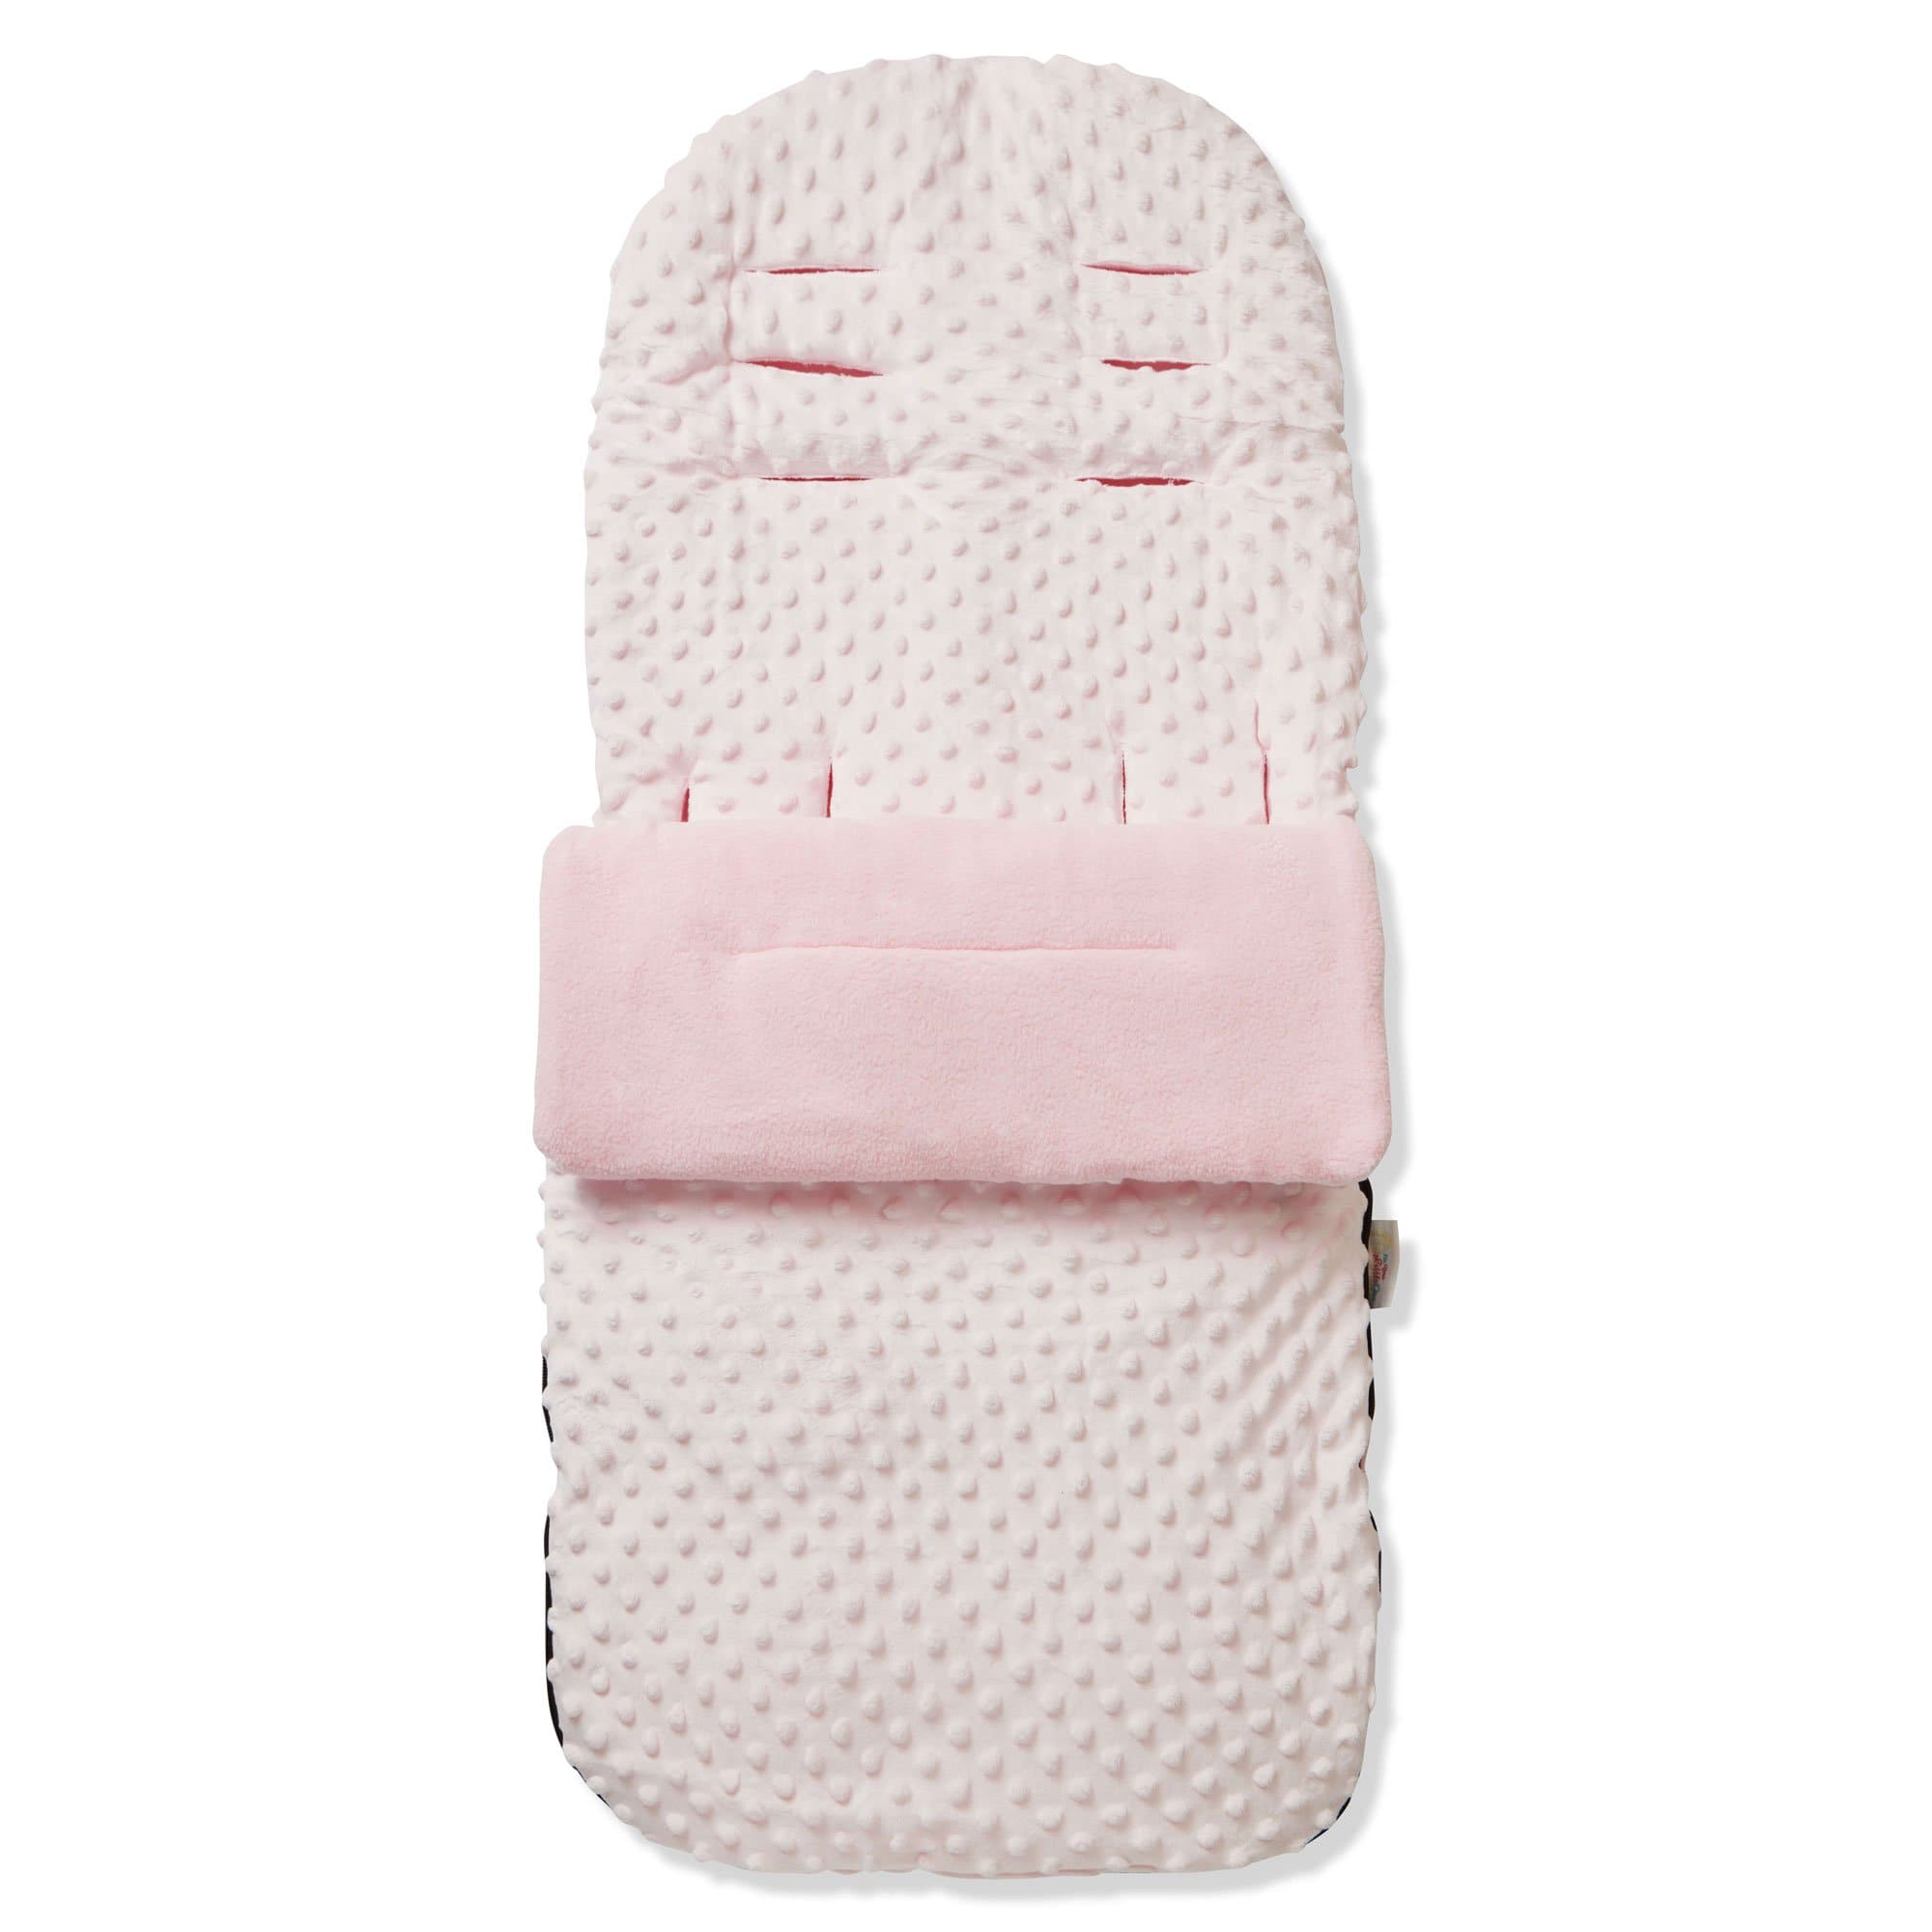 Dimple Footmuff / Cosy Toes Compatible with Britax - Pink / Fits All Models | For Your Little One